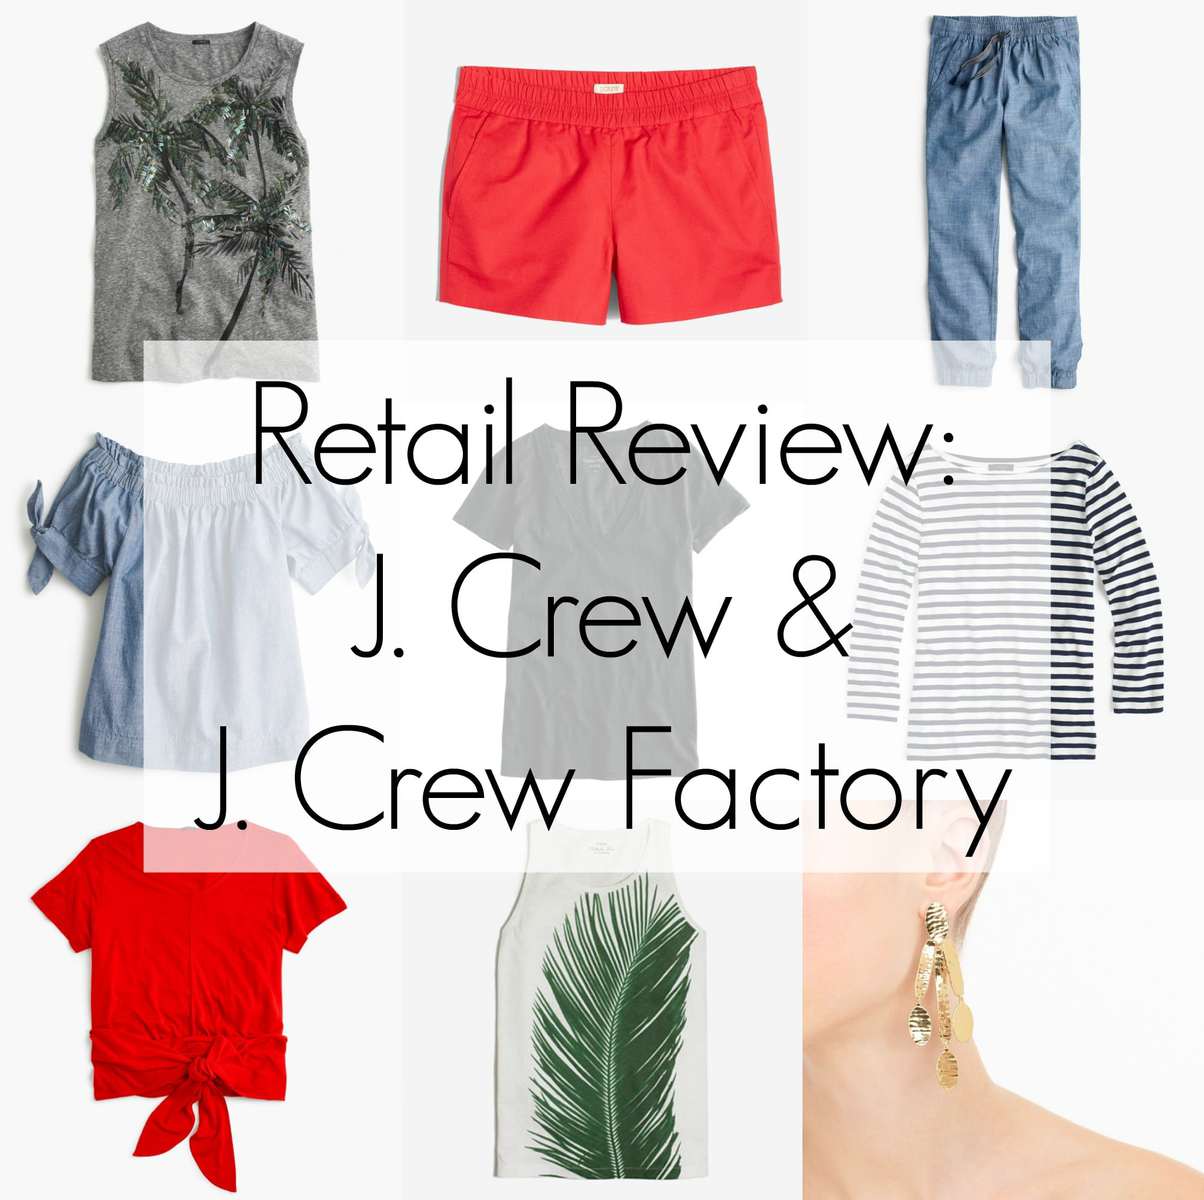 J. Crew and J. Crew Factory Summer 2017 Review hits and misses - Wardrobe OxygenJ. Crew and J. Crew Factory Summer 2017 Review hits and misses - Wardrobe Oxygen